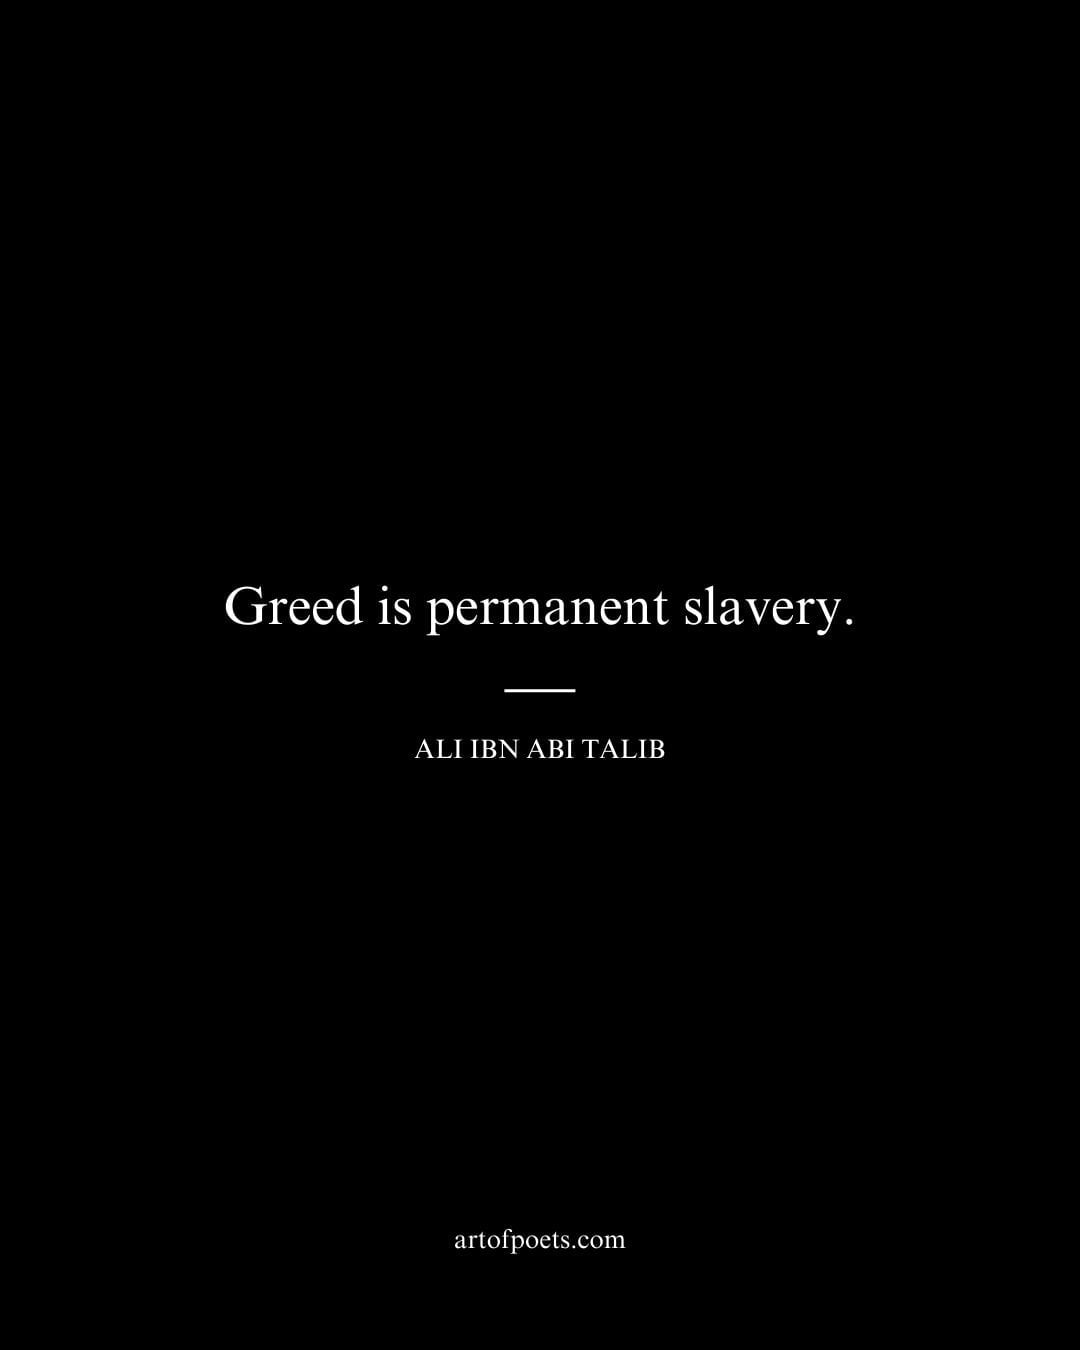 Greed is permanent slavery